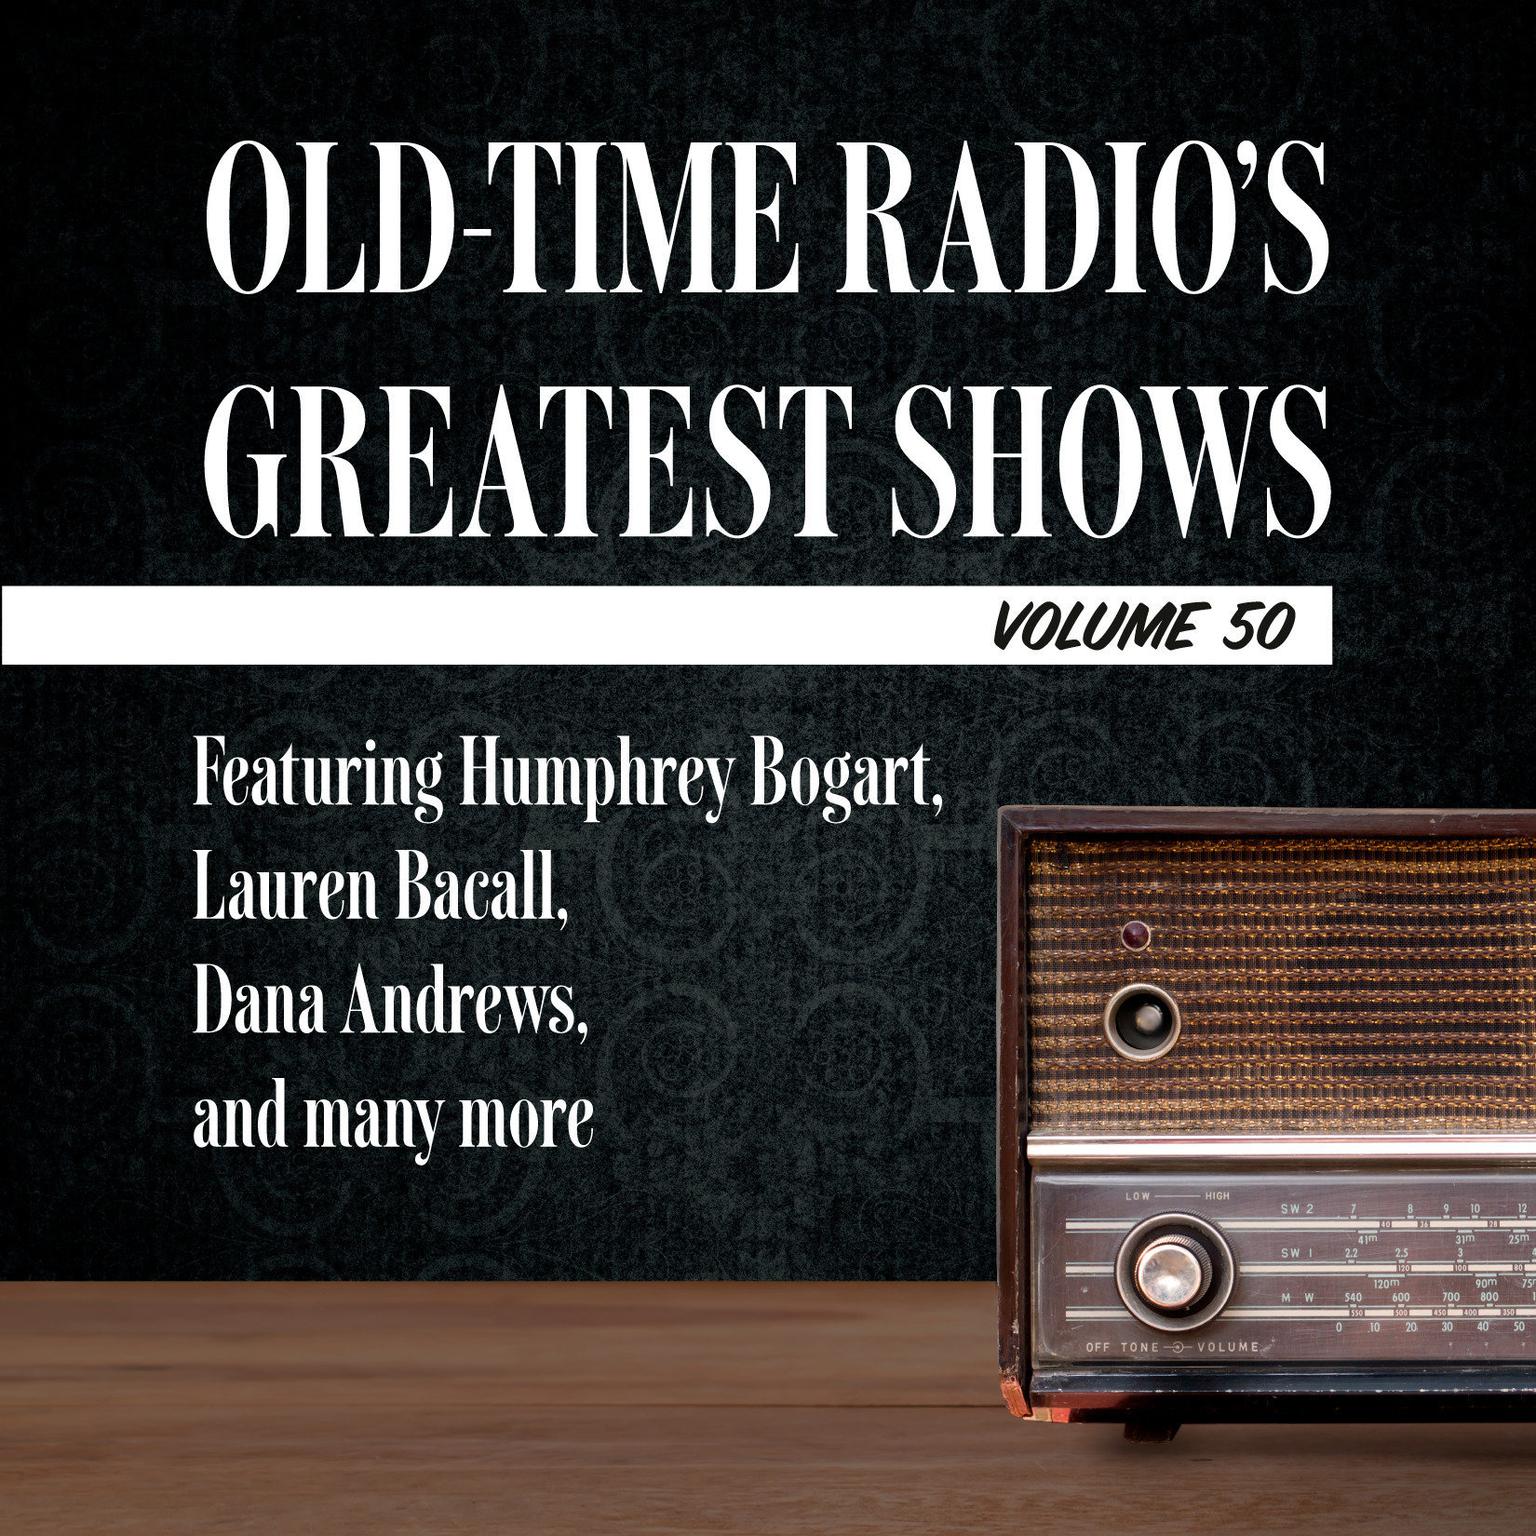 Old-Time Radios Greatest Shows, Volume 50: Featuring Humphrey Bogart, Lauren Bacall, Dana Andrews, and many more Audiobook, by Carl Amari